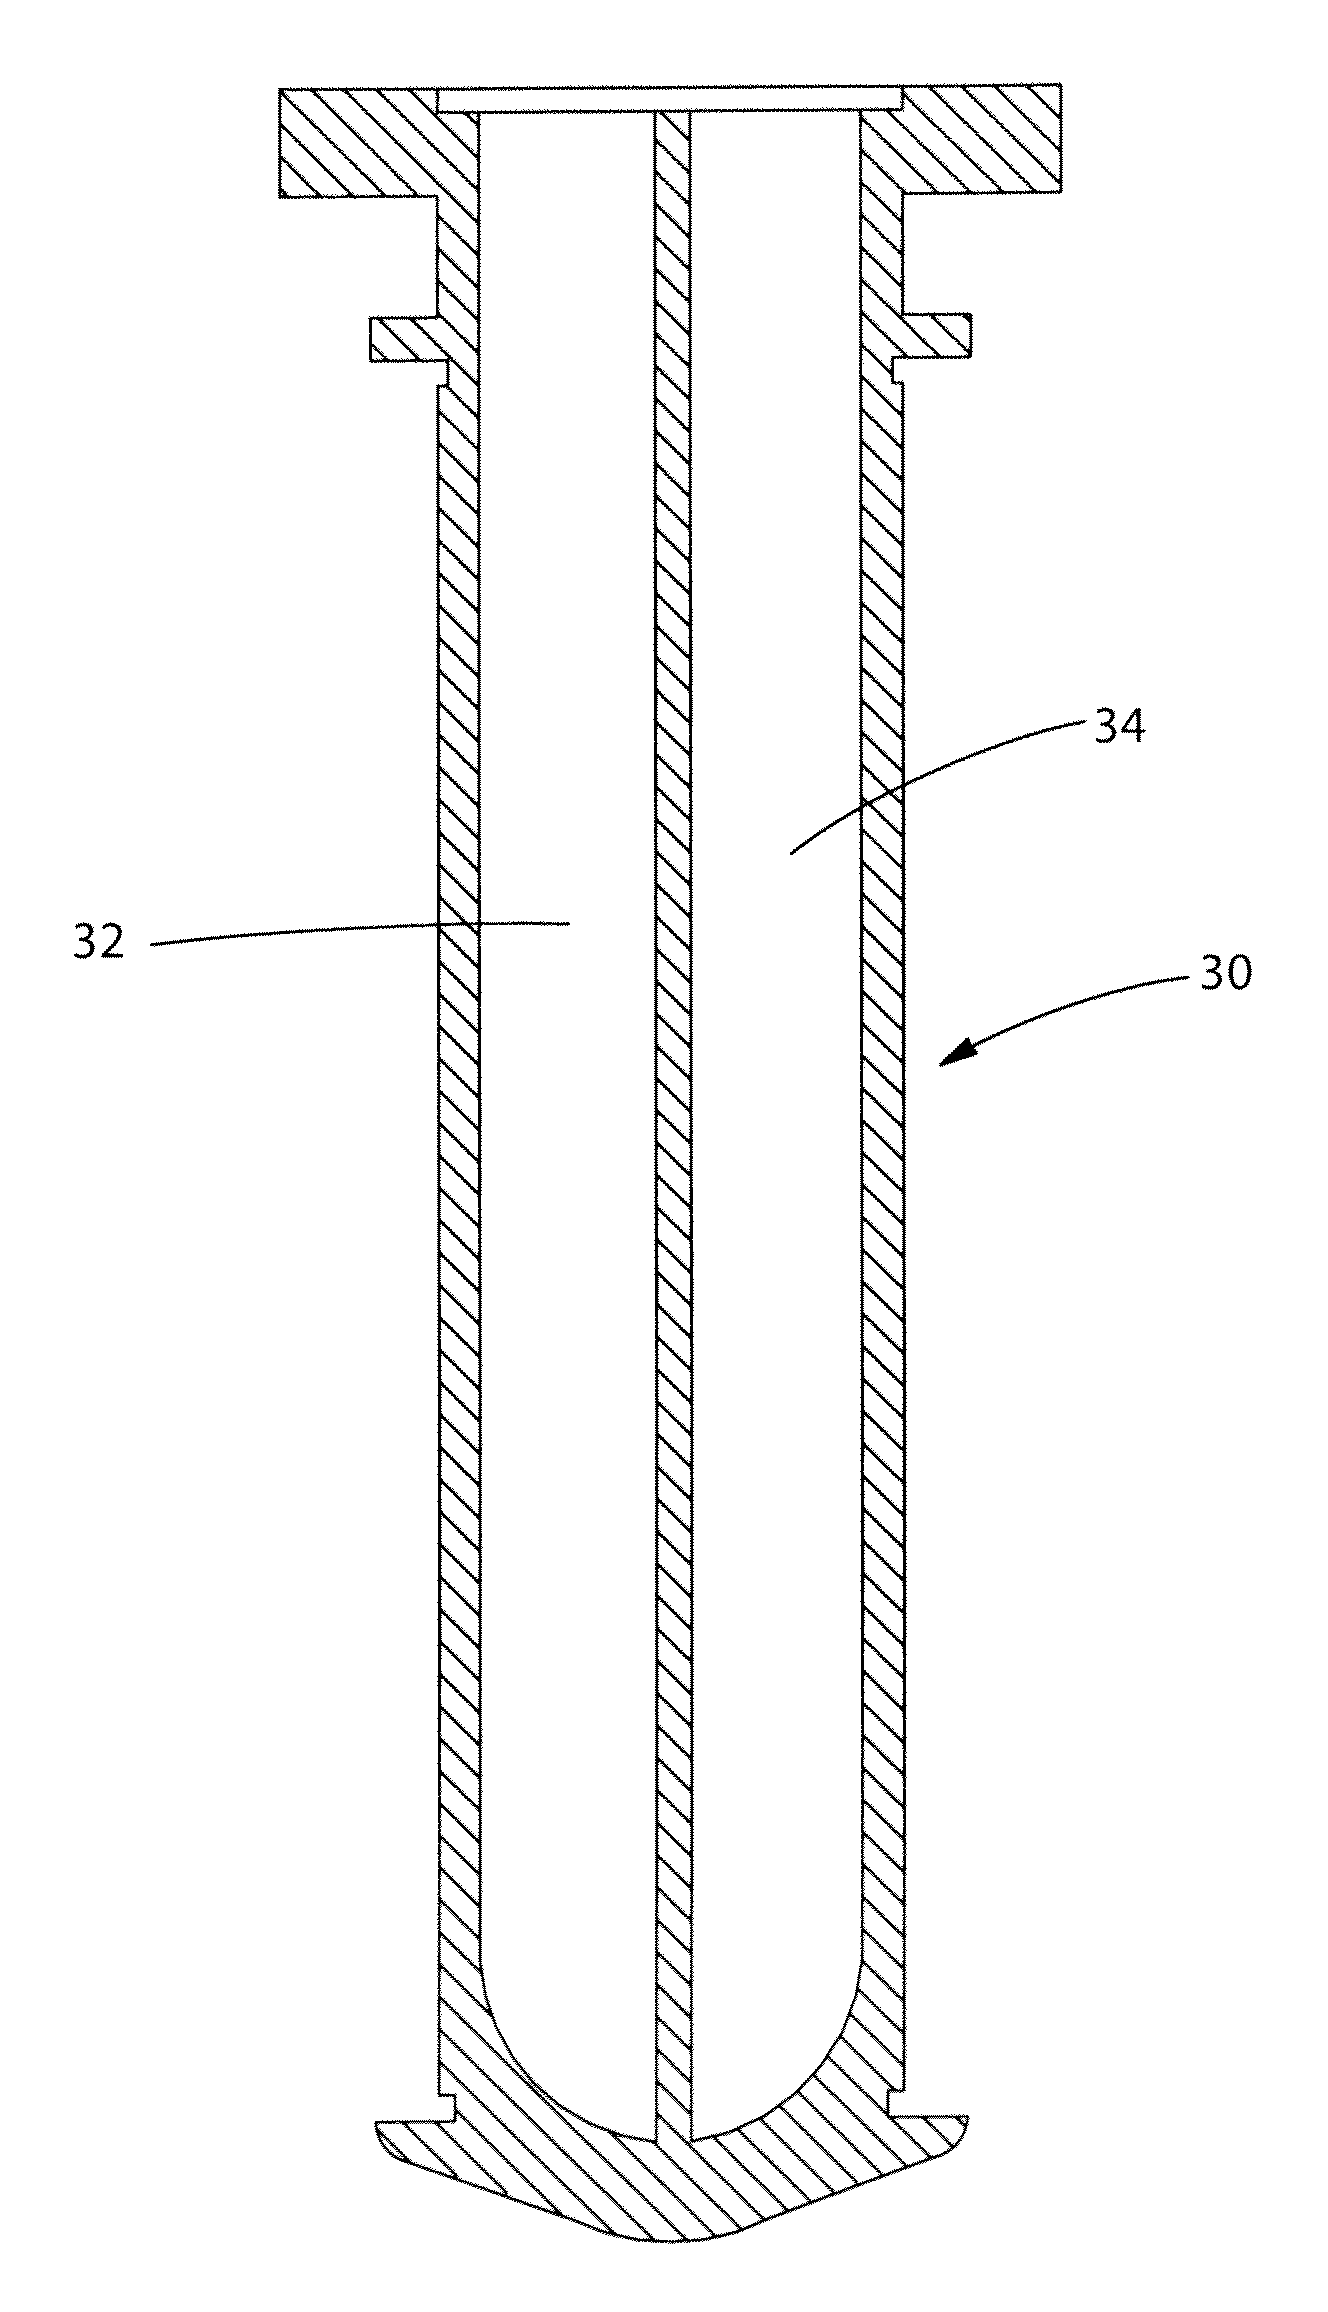 Multi-chamber material dispensing system and method for making same